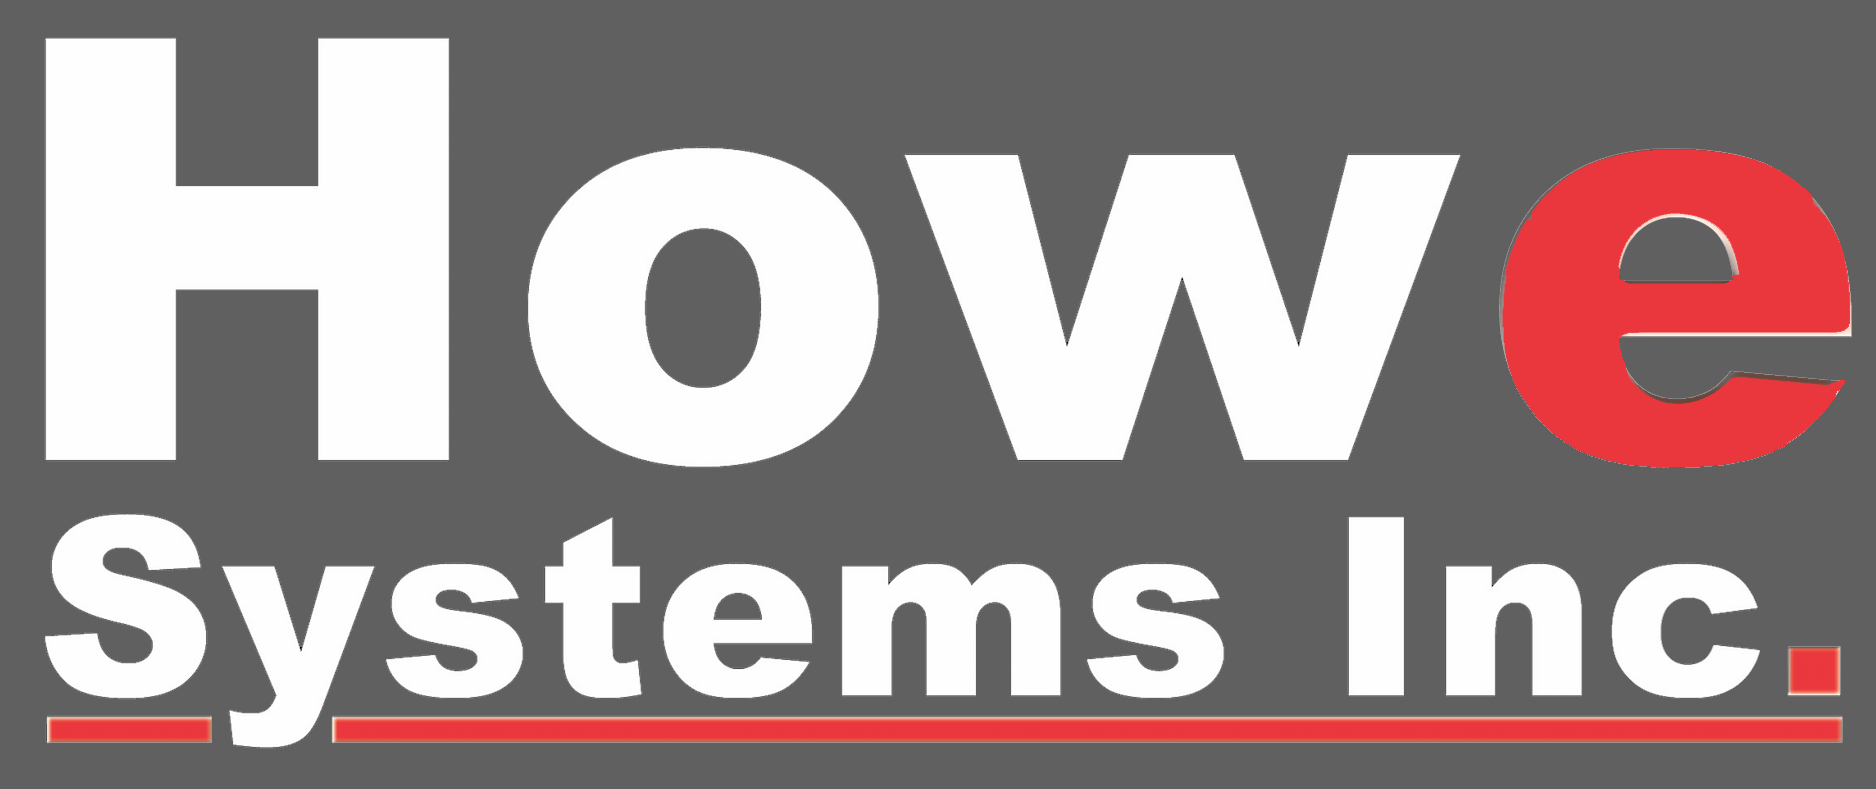 Howe Systems Inc.